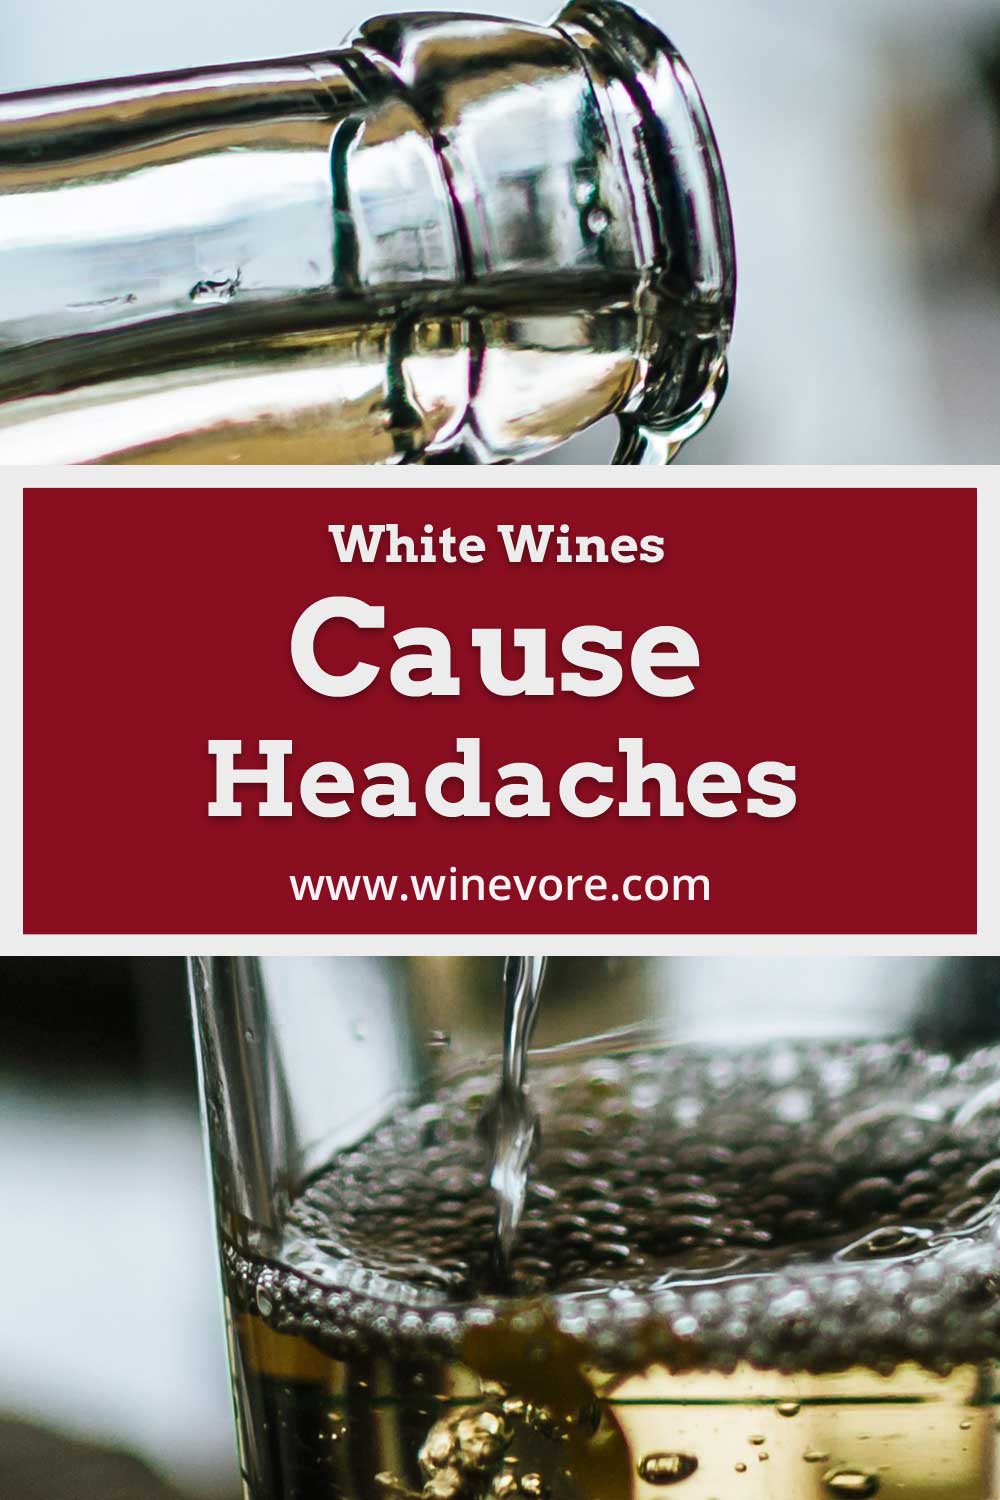 White wine being poured into a glass - White Wines Cause Headaches.